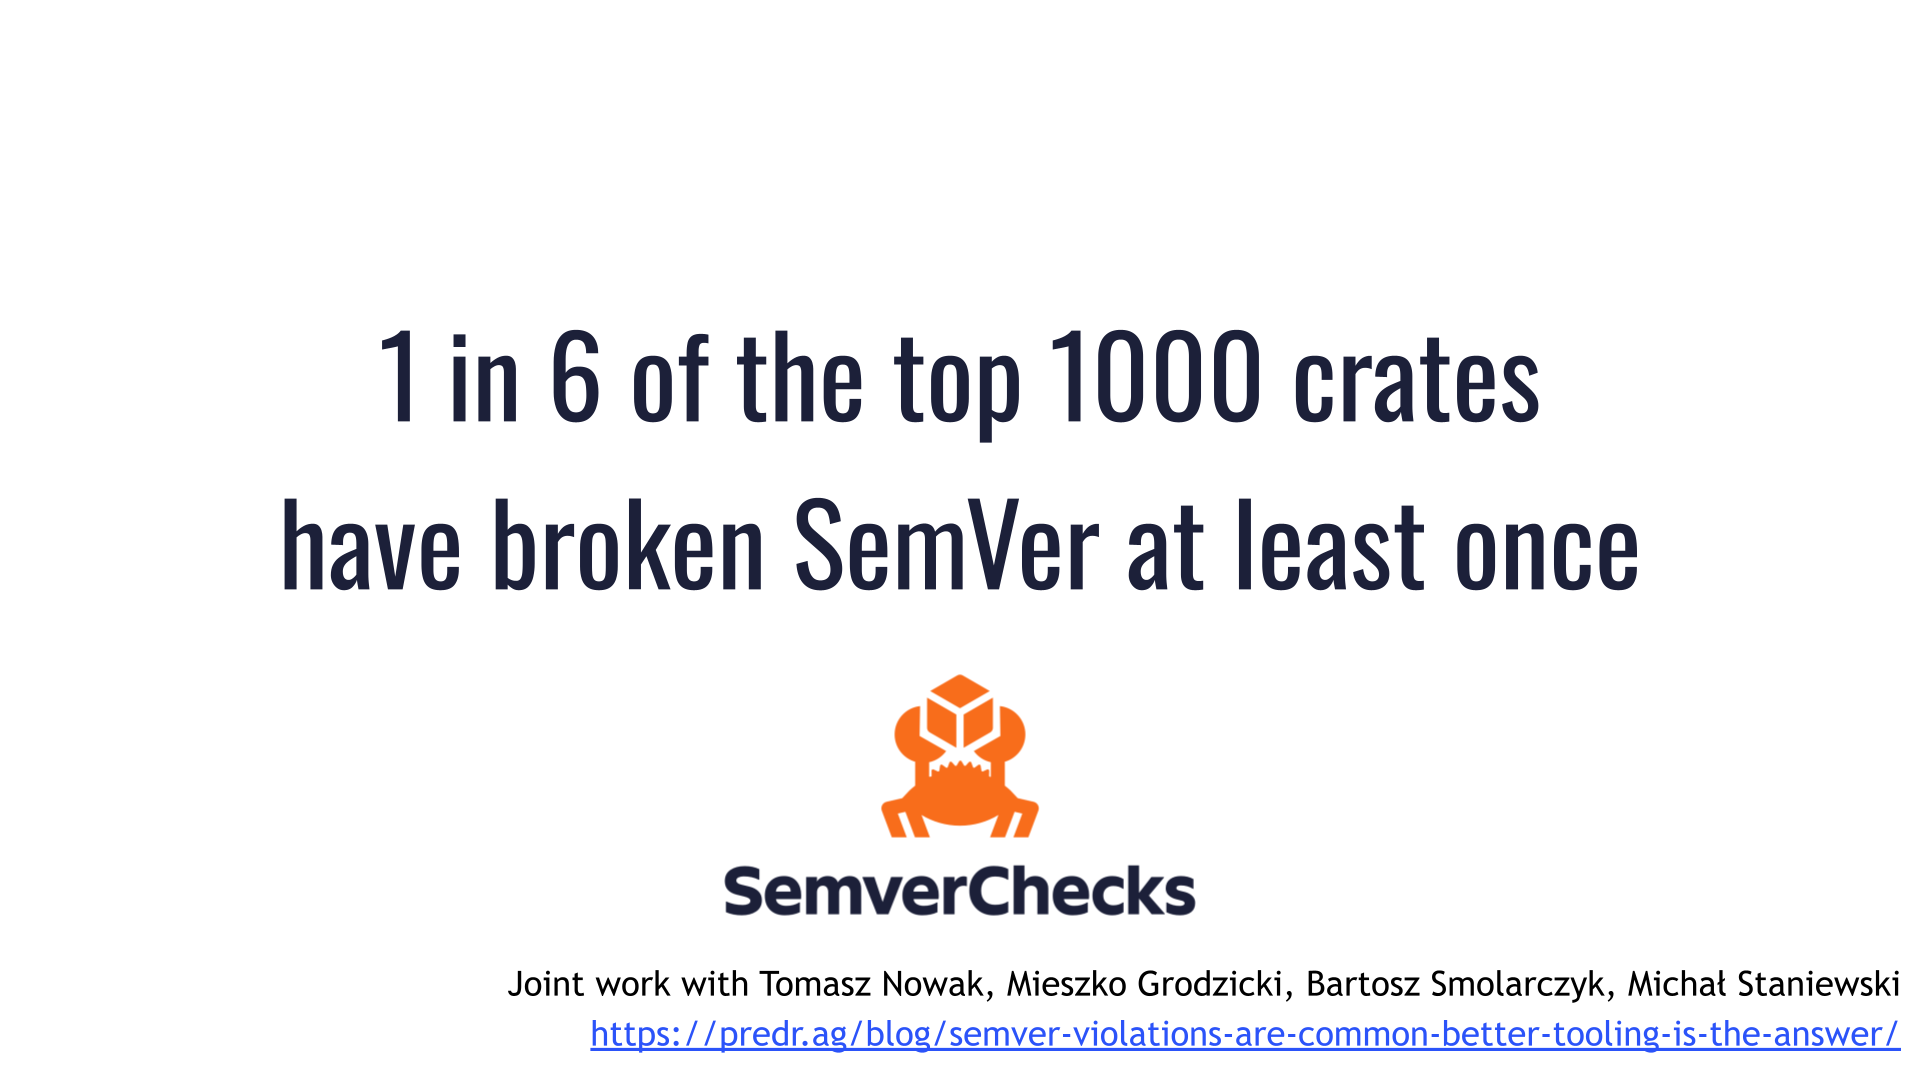 "1 in 6 of the top 1000 crates have broken SemVer at least once," in large text above the cargo-semver-checks logo. The bottom of the slide says: "Joint work with Tomasz Nowak, Mieszko Grodzicki, Bartosz Smolarczyk, Michał Staniewski"